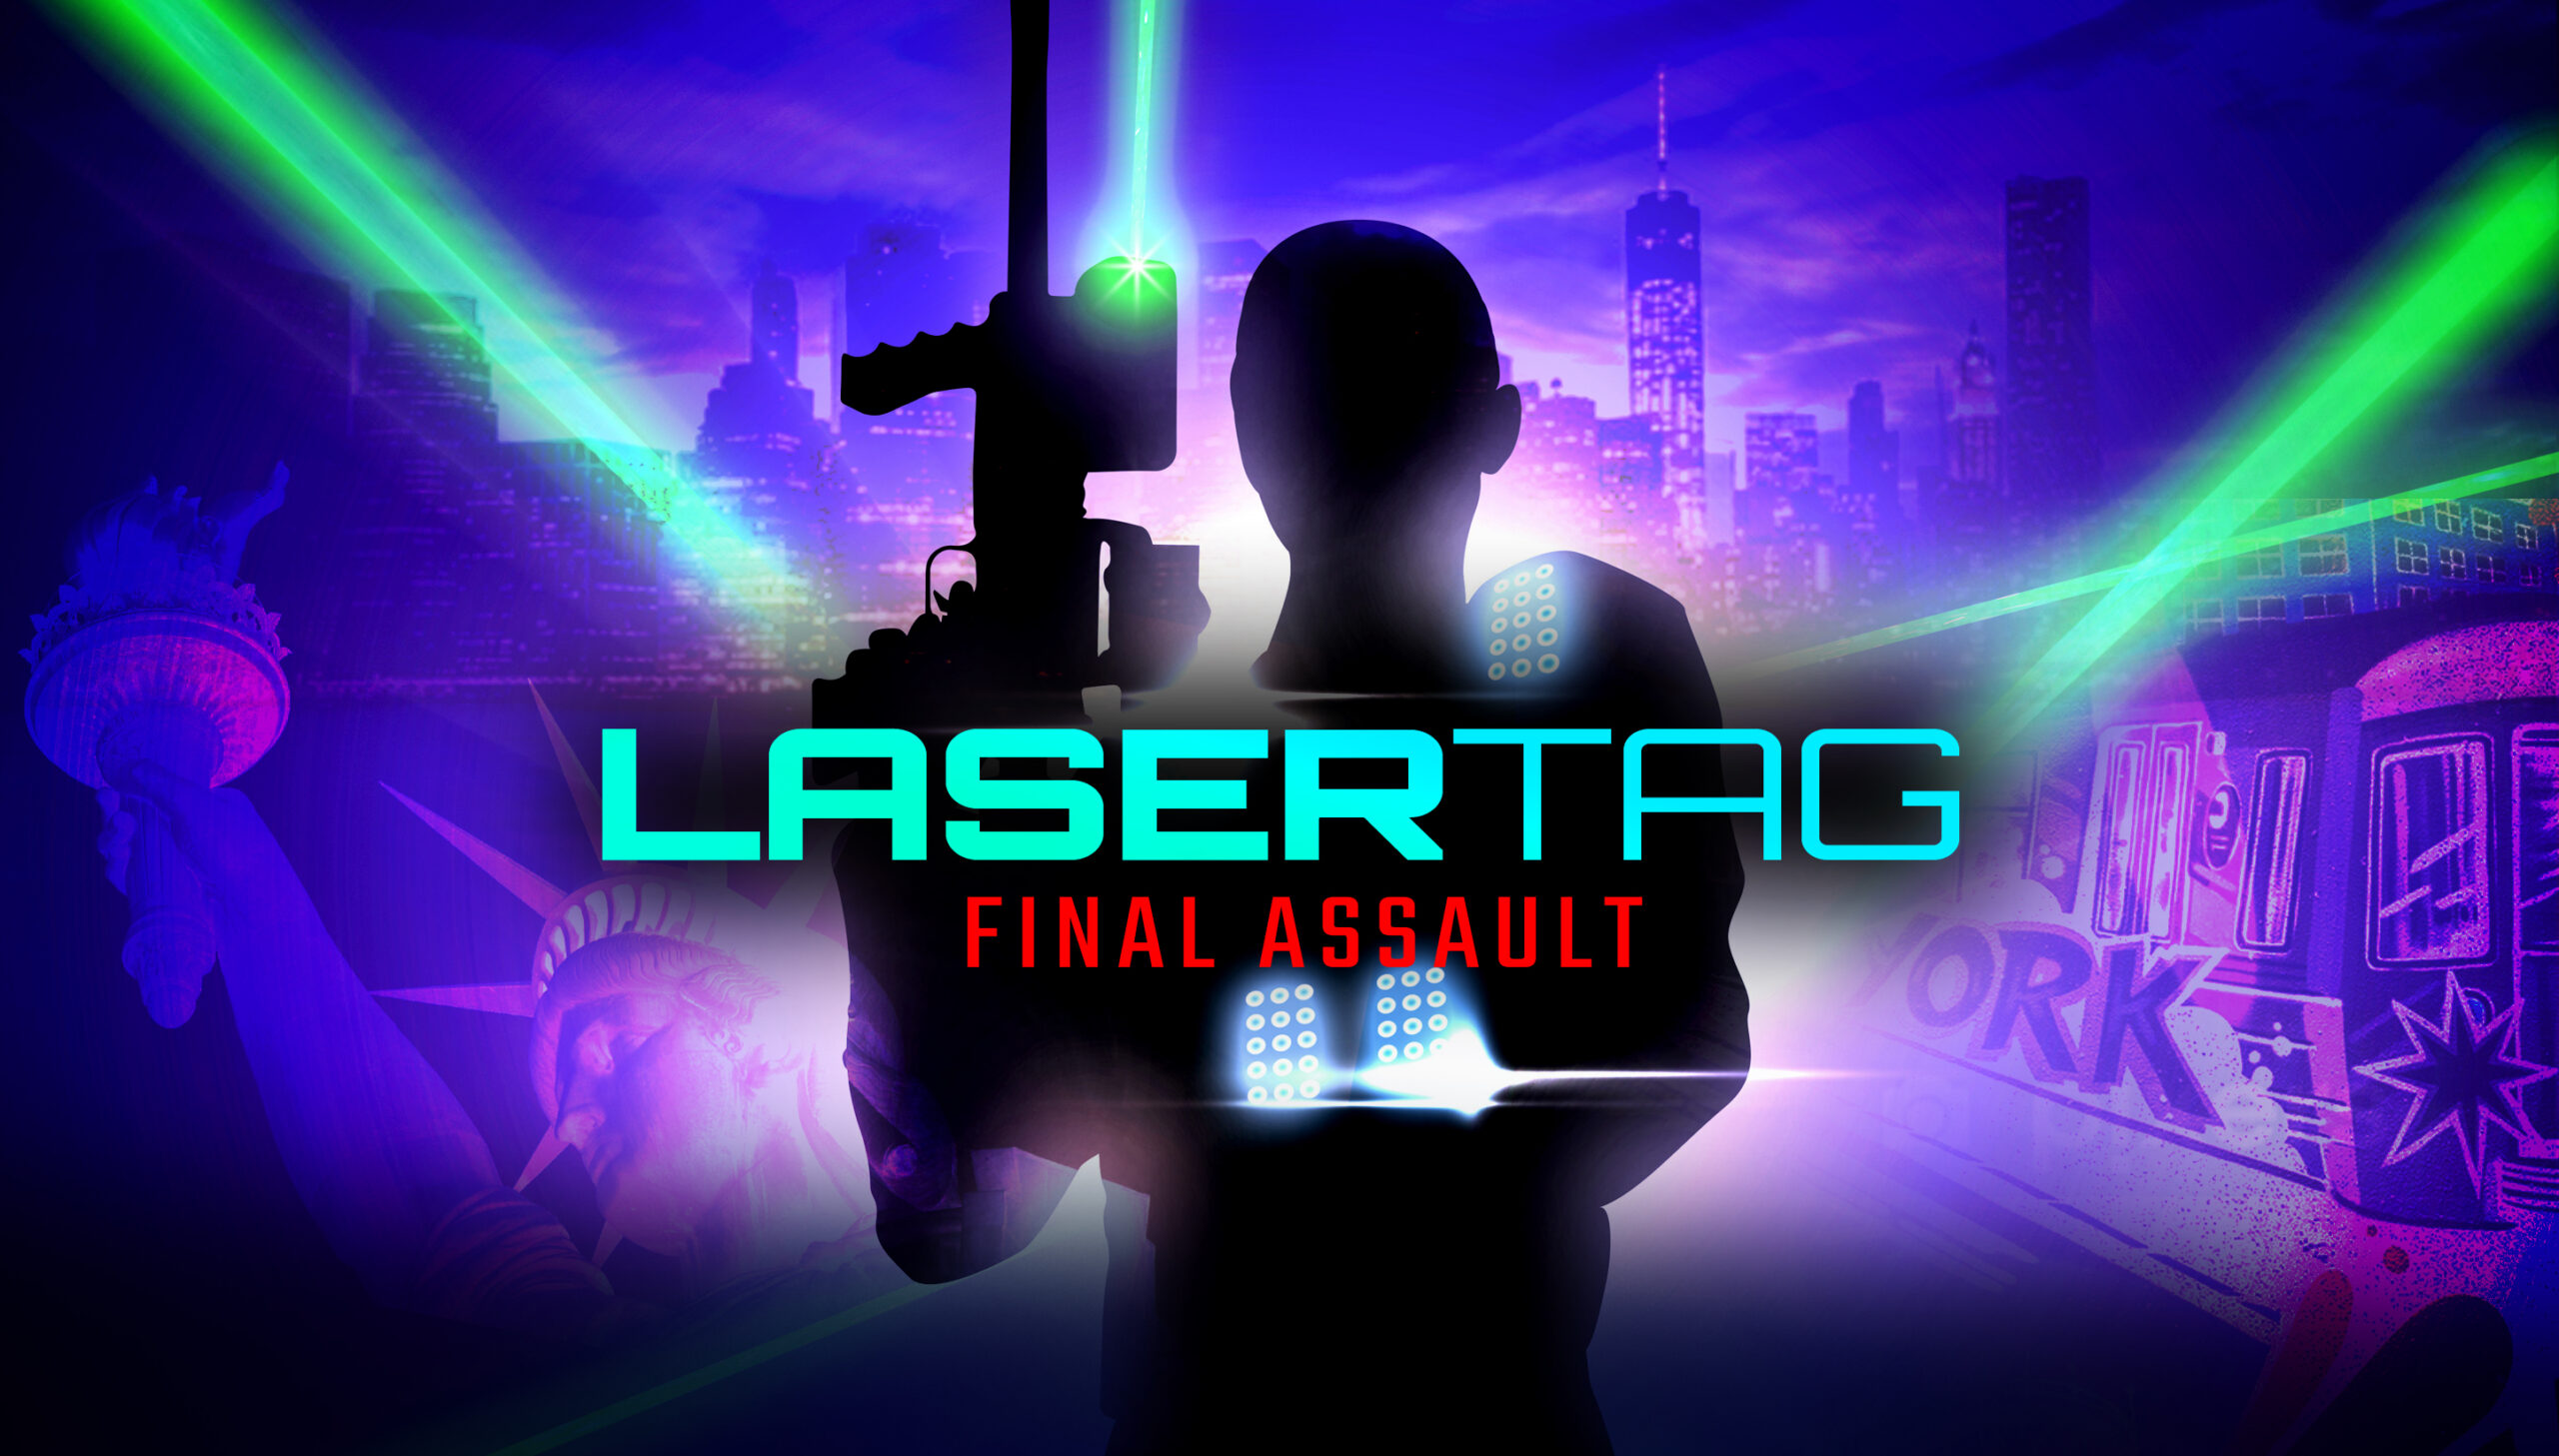 Laser Tag Arena Near You! - Xtreme Play in Danbury, CT